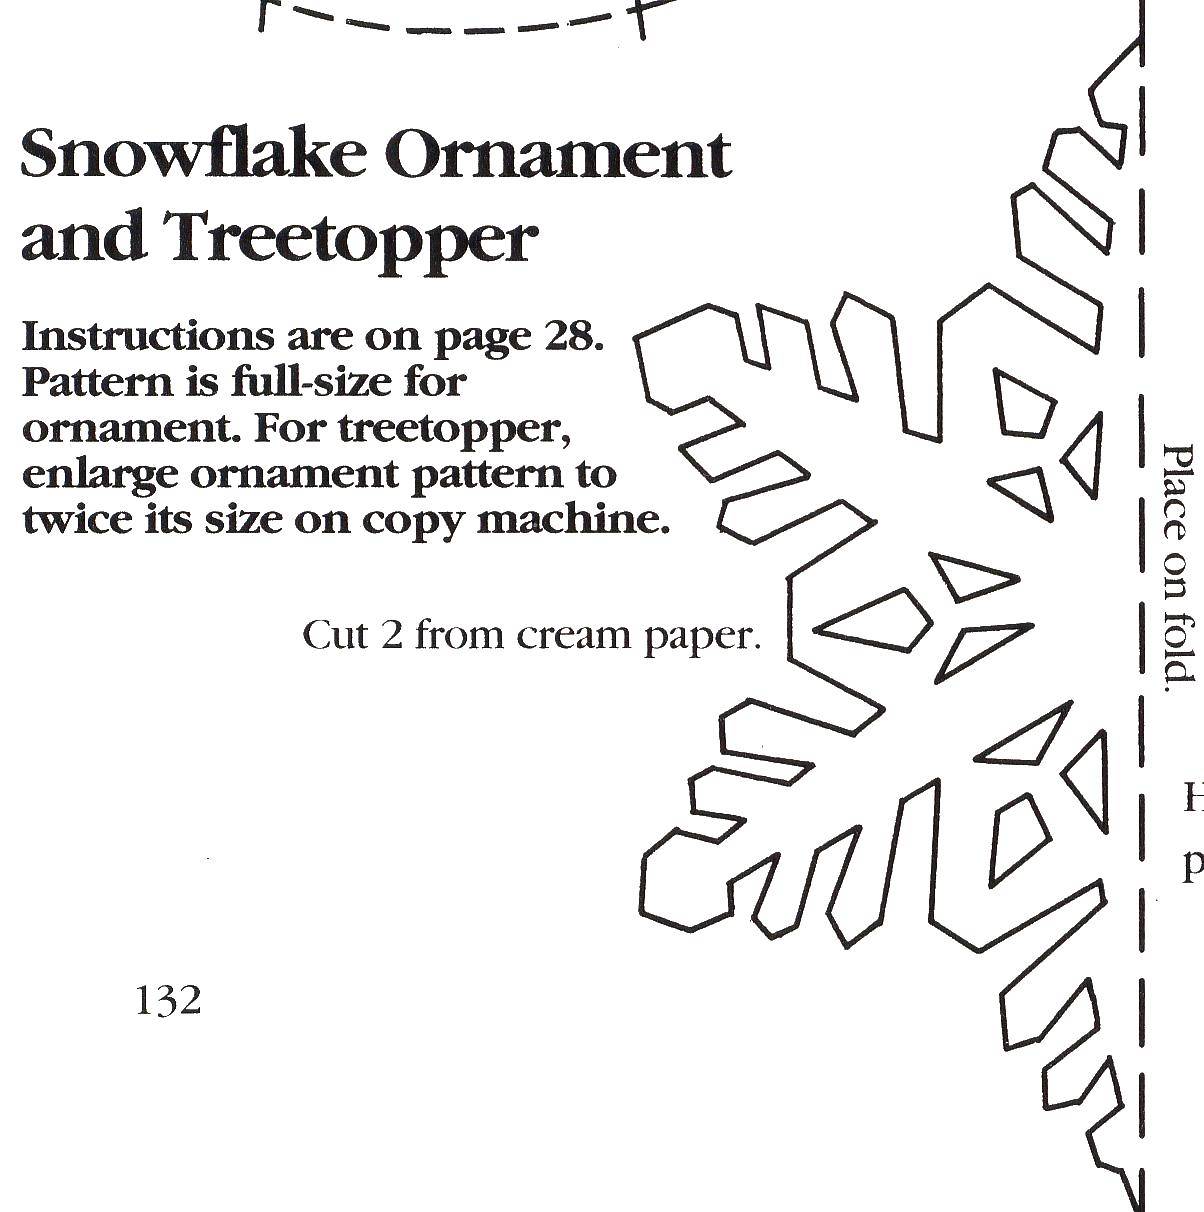 Coloring Snowflake to cut. Category The contour snowflakes. Tags:  snowflake.